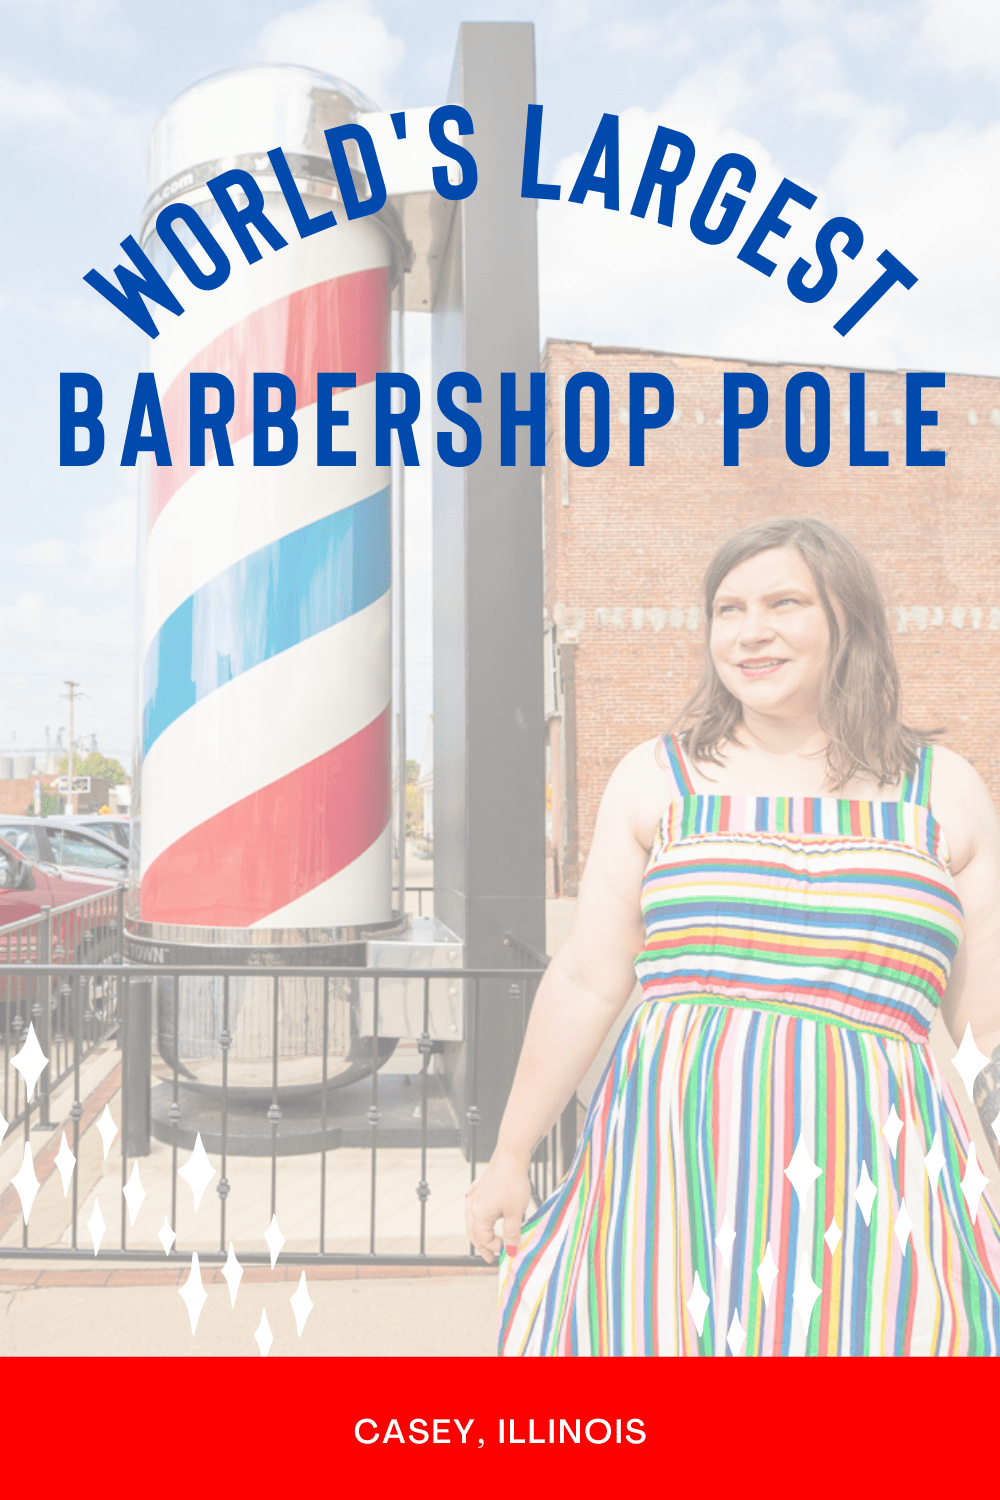 This Illinois roadside attraction might just be a cut above the rest — it’s the world’s largest barbershop pole in Casey, Illinois. At 14 feet tall and 3 feet 11 inches wide, this Illinois roadside attraction is a hair above ten times the size of the standard.  #IllinoisRoadsideAttractions #IllinoisRoadsideAttraction #RoadsideAttractions #RoadsideAttraction #RoadTrip #IllinoisRoadTrip #IllinoisWeekendGetaways #IllinoisWithKids #IllinoisRoadTripTravel